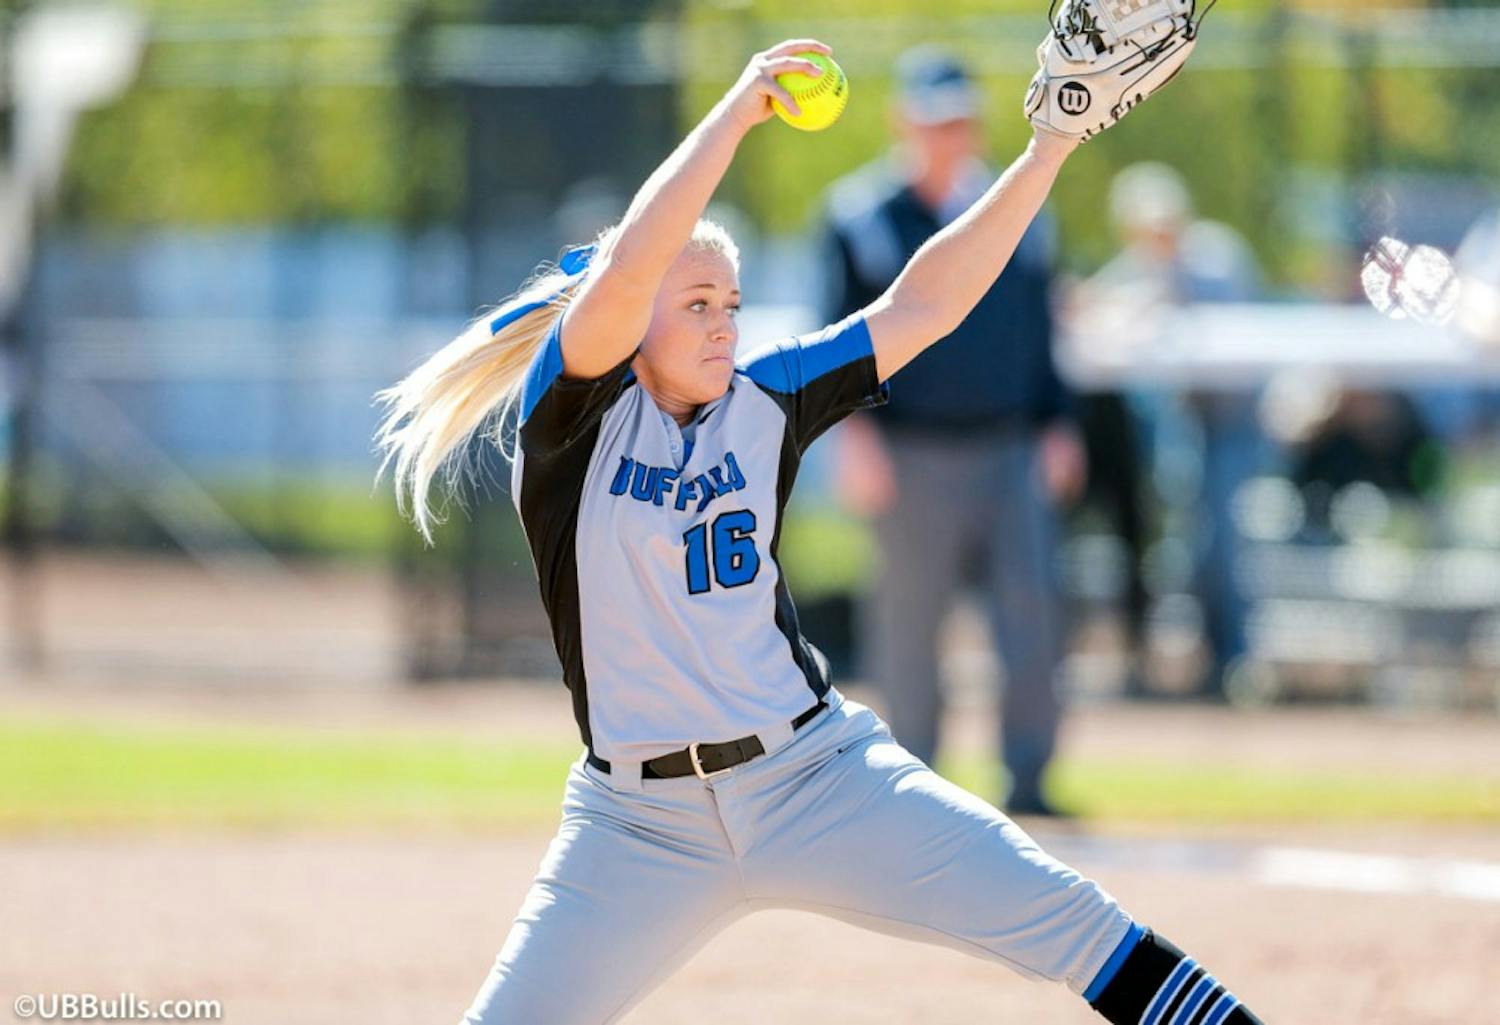 Junior pitcher Ally Power winds up for the pitch. The Bulls will play five games in the EMU invitational this weekend.